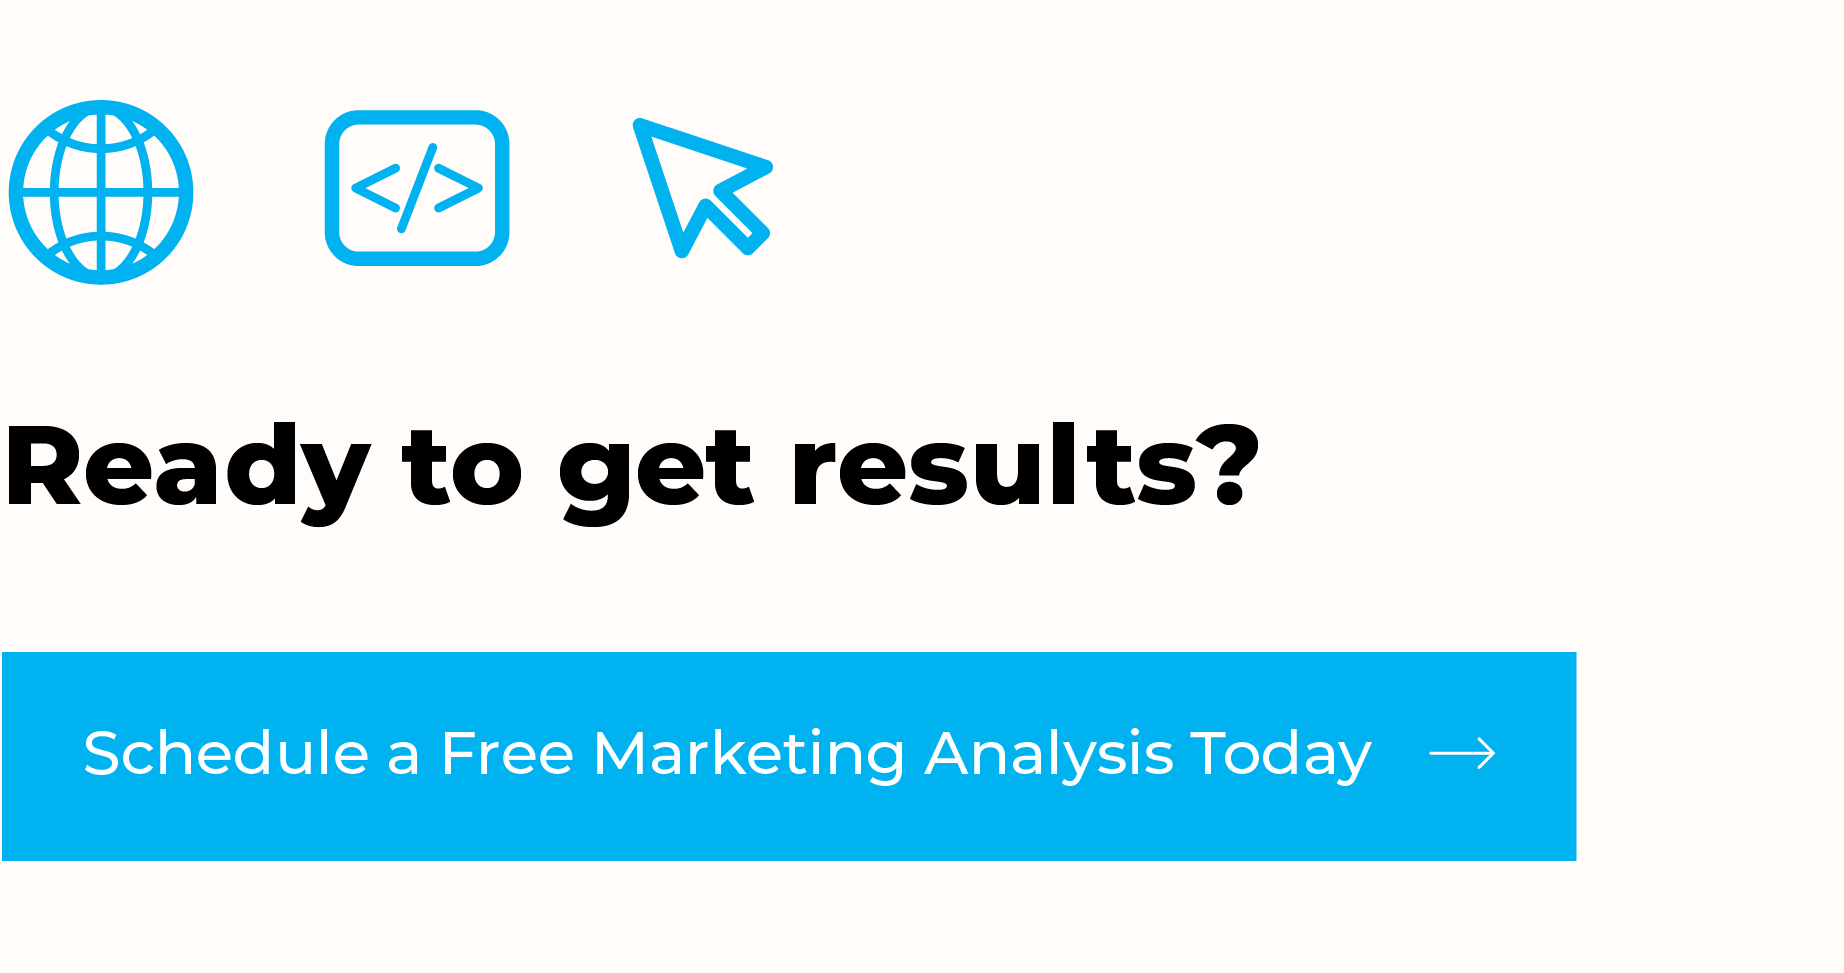 Ready to Get Results? Schedule Your Free Marketing Analysis Today